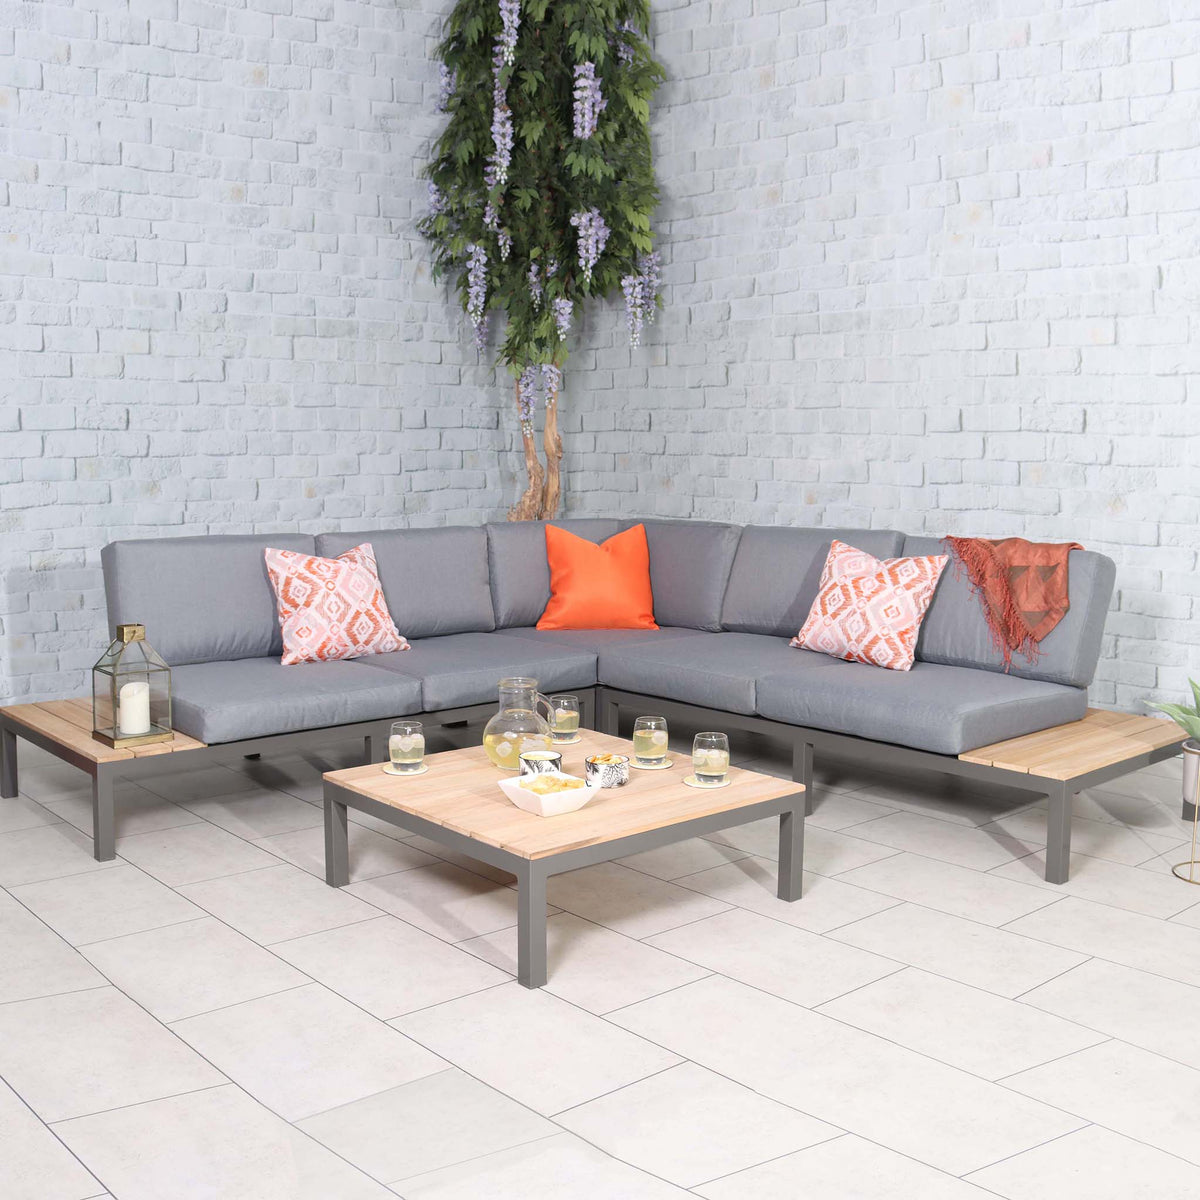 Aspen Garden Lounge Set with Teak Coffee & Side Tables from Roseland Furniture